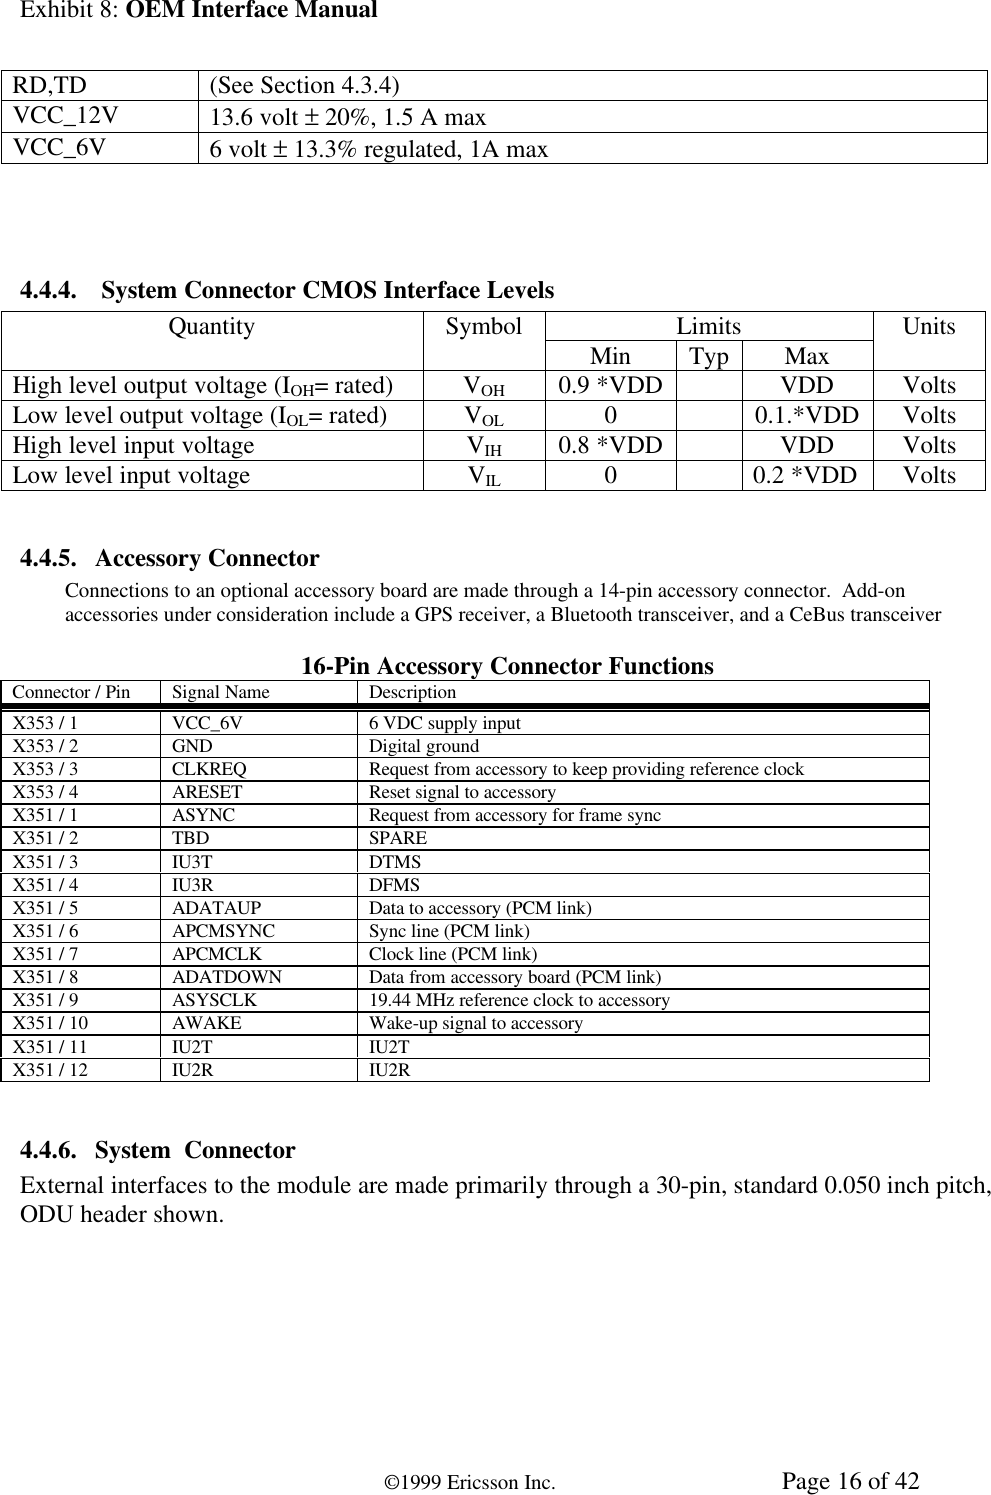 Exhibit 8: OEM Interface Manual©1999 Ericsson Inc. Page 16 of 42RD,TD (See Section 4.3.4)VCC_12V 13.6 volt ± 20%, 1.5 A maxVCC_6V 6 volt ± 13.3% regulated, 1A max4.4.4.  System Connector CMOS Interface LevelsLimitsQuantity Symbol Min Typ Max UnitsHigh level output voltage (IOH= rated) VOH 0.9 *VDD VDD VoltsLow level output voltage (IOL= rated) VOL 00.1.*VDD VoltsHigh level input voltage VIH 0.8 *VDD VDD VoltsLow level input voltage VIL 00.2 *VDD Volts4.4.5. Accessory ConnectorConnections to an optional accessory board are made through a 14-pin accessory connector.  Add-onaccessories under consideration include a GPS receiver, a Bluetooth transceiver, and a CeBus transceiver16-Pin Accessory Connector FunctionsConnector / Pin Signal Name DescriptionX353 / 1 VCC_6V 6 VDC supply inputX353 / 2 GND Digital groundX353 / 3 CLKREQ Request from accessory to keep providing reference clockX353 / 4 ARESET Reset signal to accessoryX351 / 1 ASYNC Request from accessory for frame syncX351 / 2 TBD SPAREX351 / 3 IU3T DTMSX351 / 4 IU3R DFMSX351 / 5 ADATAUP Data to accessory (PCM link)X351 / 6 APCMSYNC Sync line (PCM link)X351 / 7 APCMCLK Clock line (PCM link)X351 / 8 ADATDOWN Data from accessory board (PCM link)X351 / 9 ASYSCLK 19.44 MHz reference clock to accessoryX351 / 10 AWAKE Wake-up signal to accessoryX351 / 11 IU2T IU2TX351 / 12 IU2R IU2R4.4.6. System  ConnectorExternal interfaces to the module are made primarily through a 30-pin, standard 0.050 inch pitch,ODU header shown.